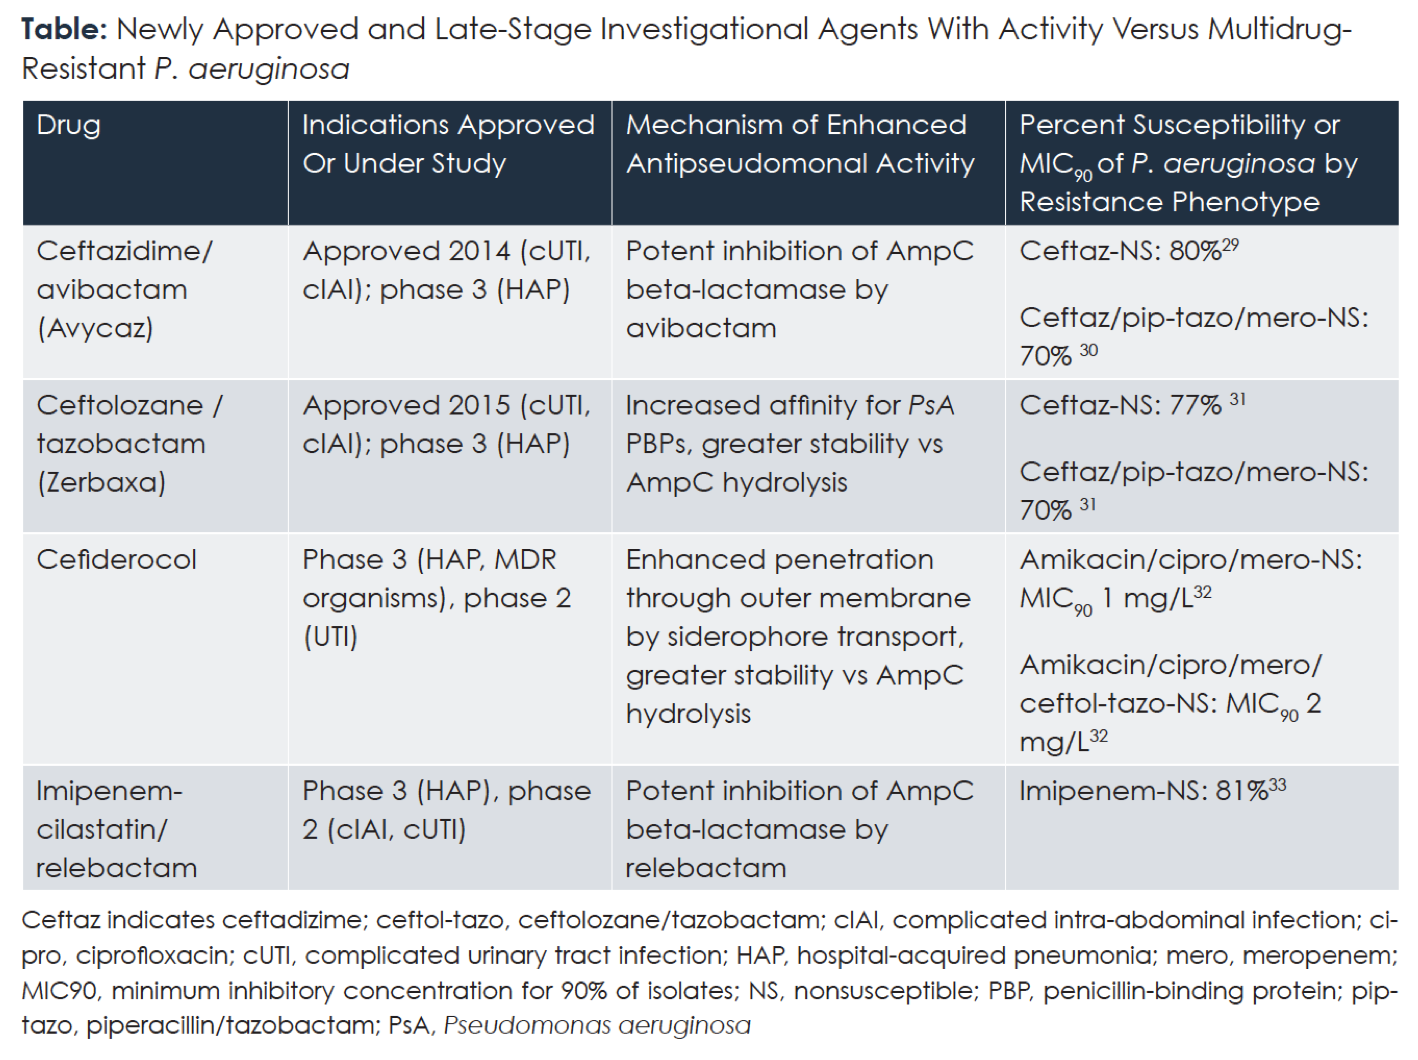 MDR Pseudomonas Infections Agents